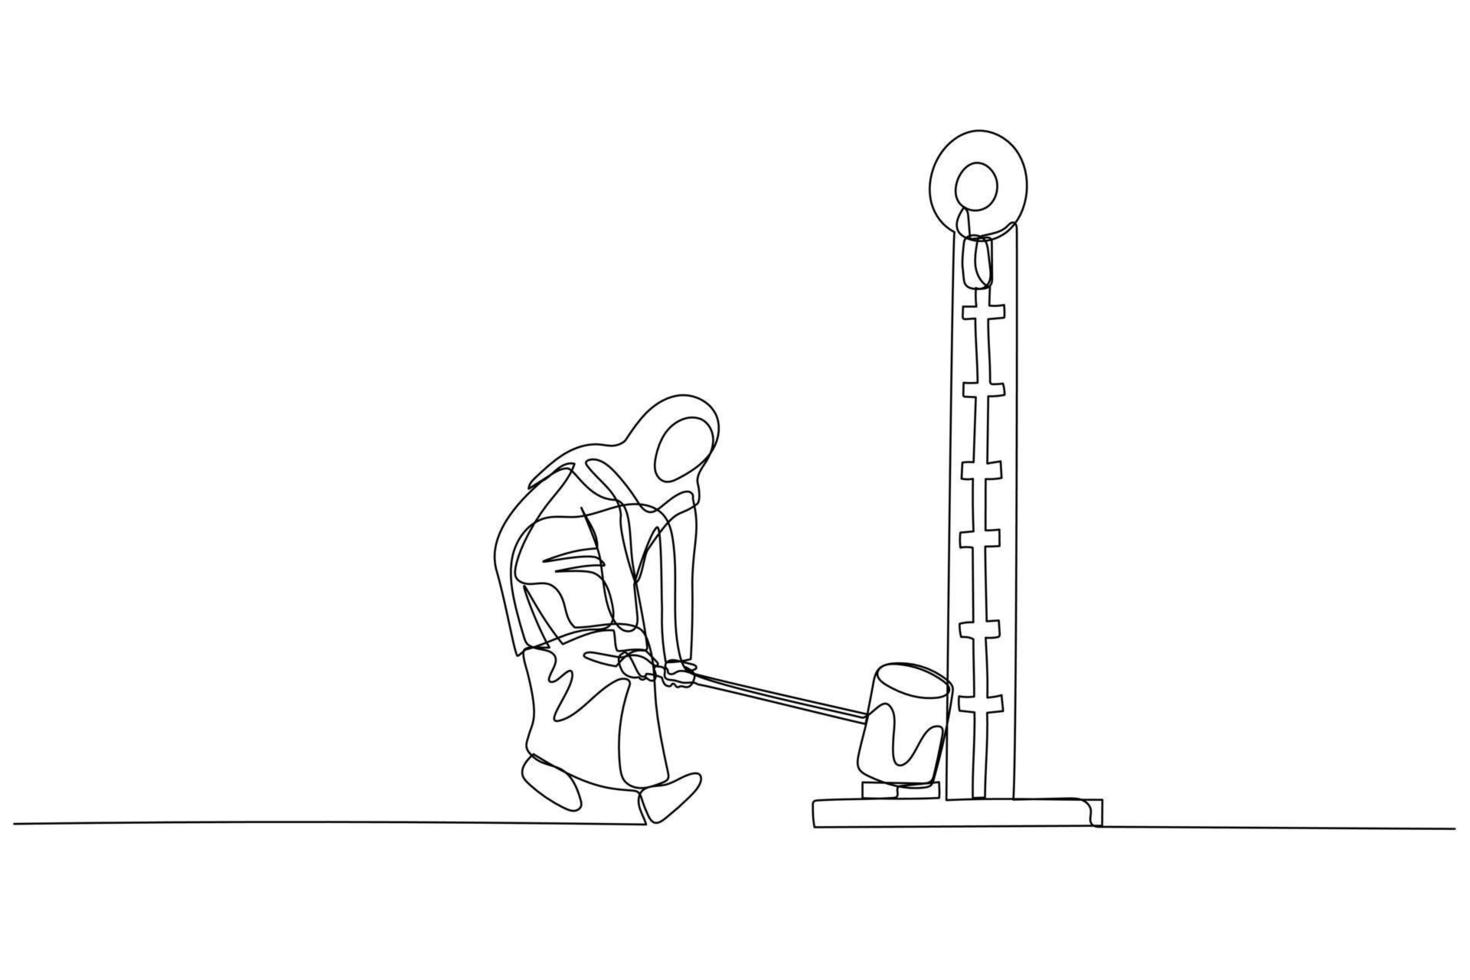 Drawing of muslim woman hitting strength measurement tool. Concept of power estimation. Single line art style vector